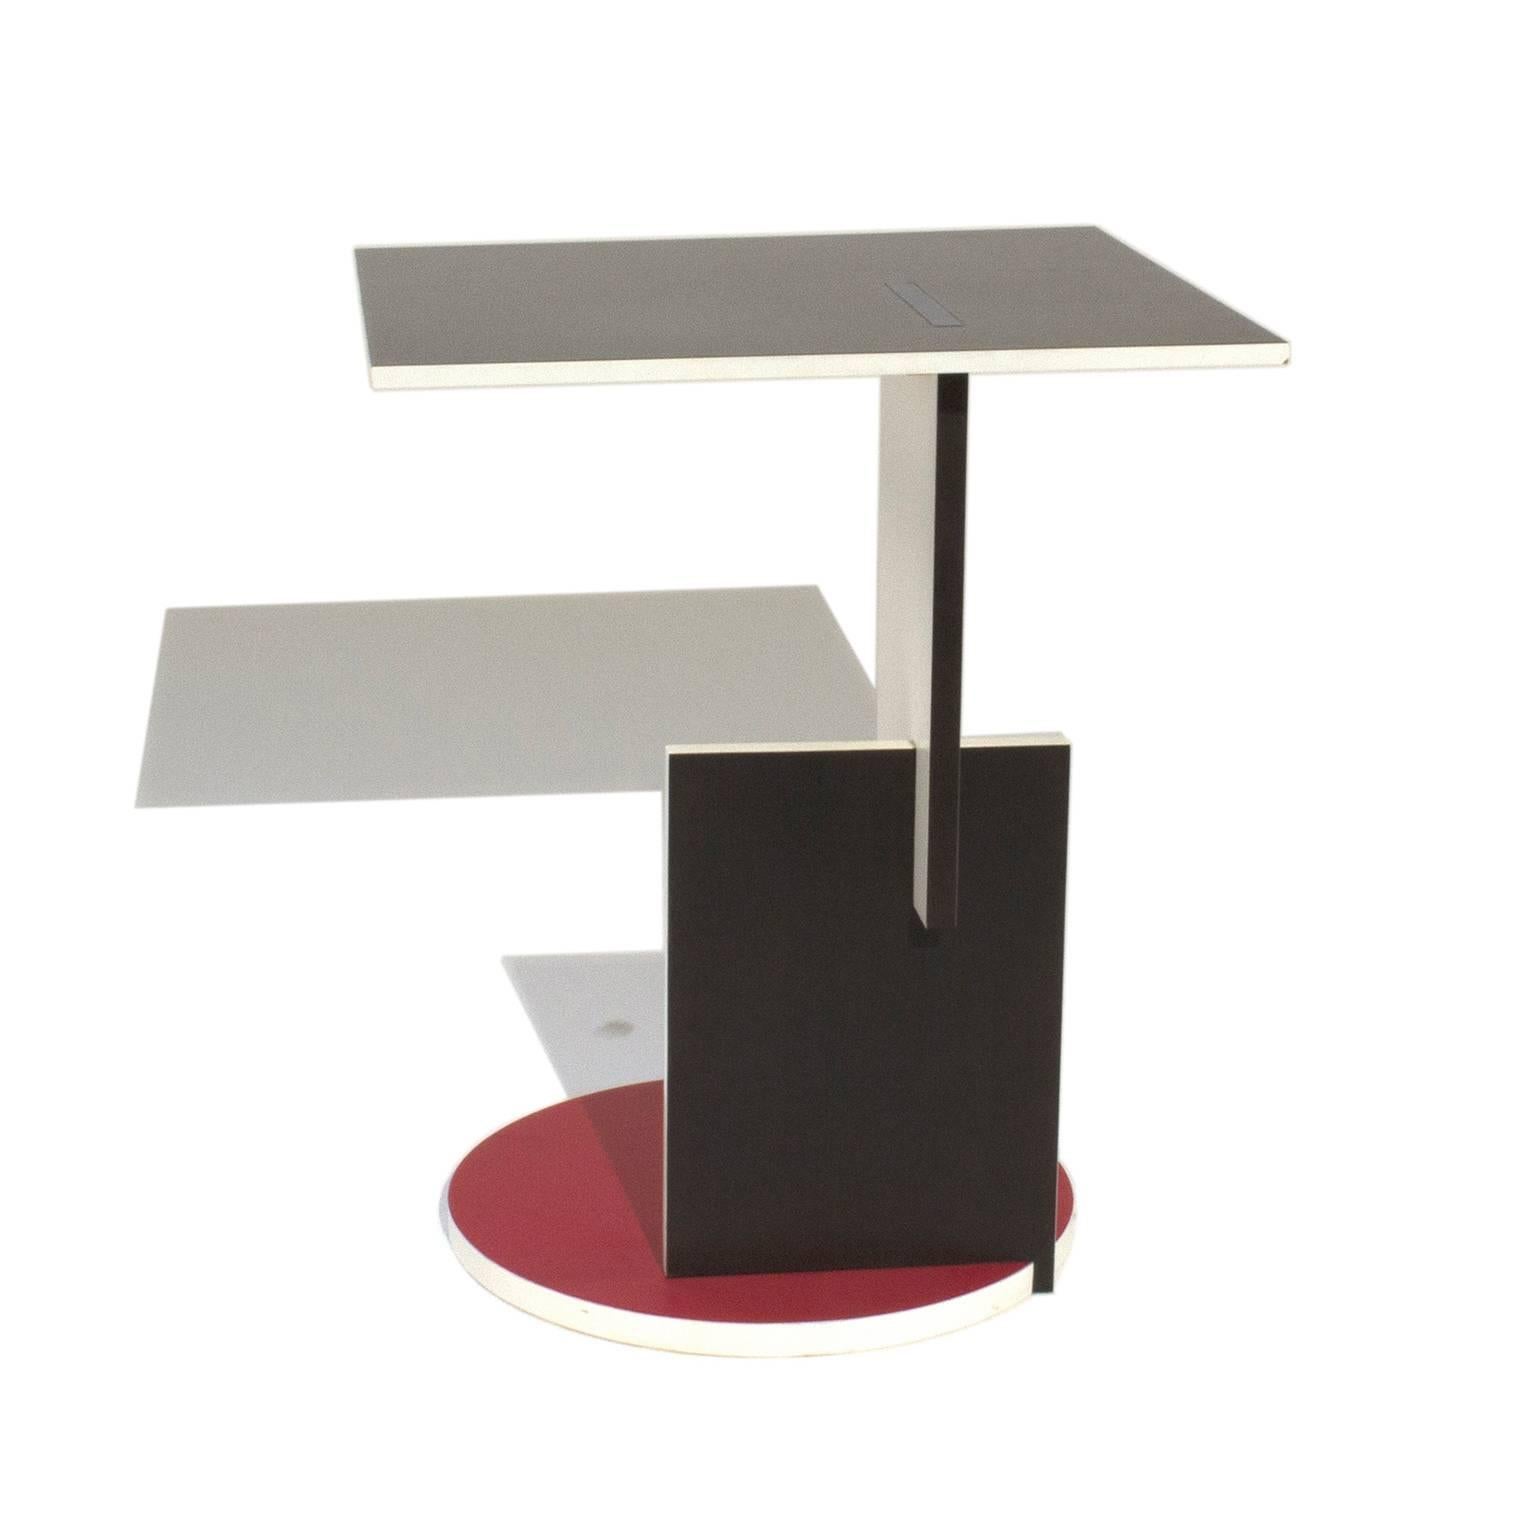 Schroeder One Low Table by Gerrit Rietveld for Cassina, Italy For Sale 1